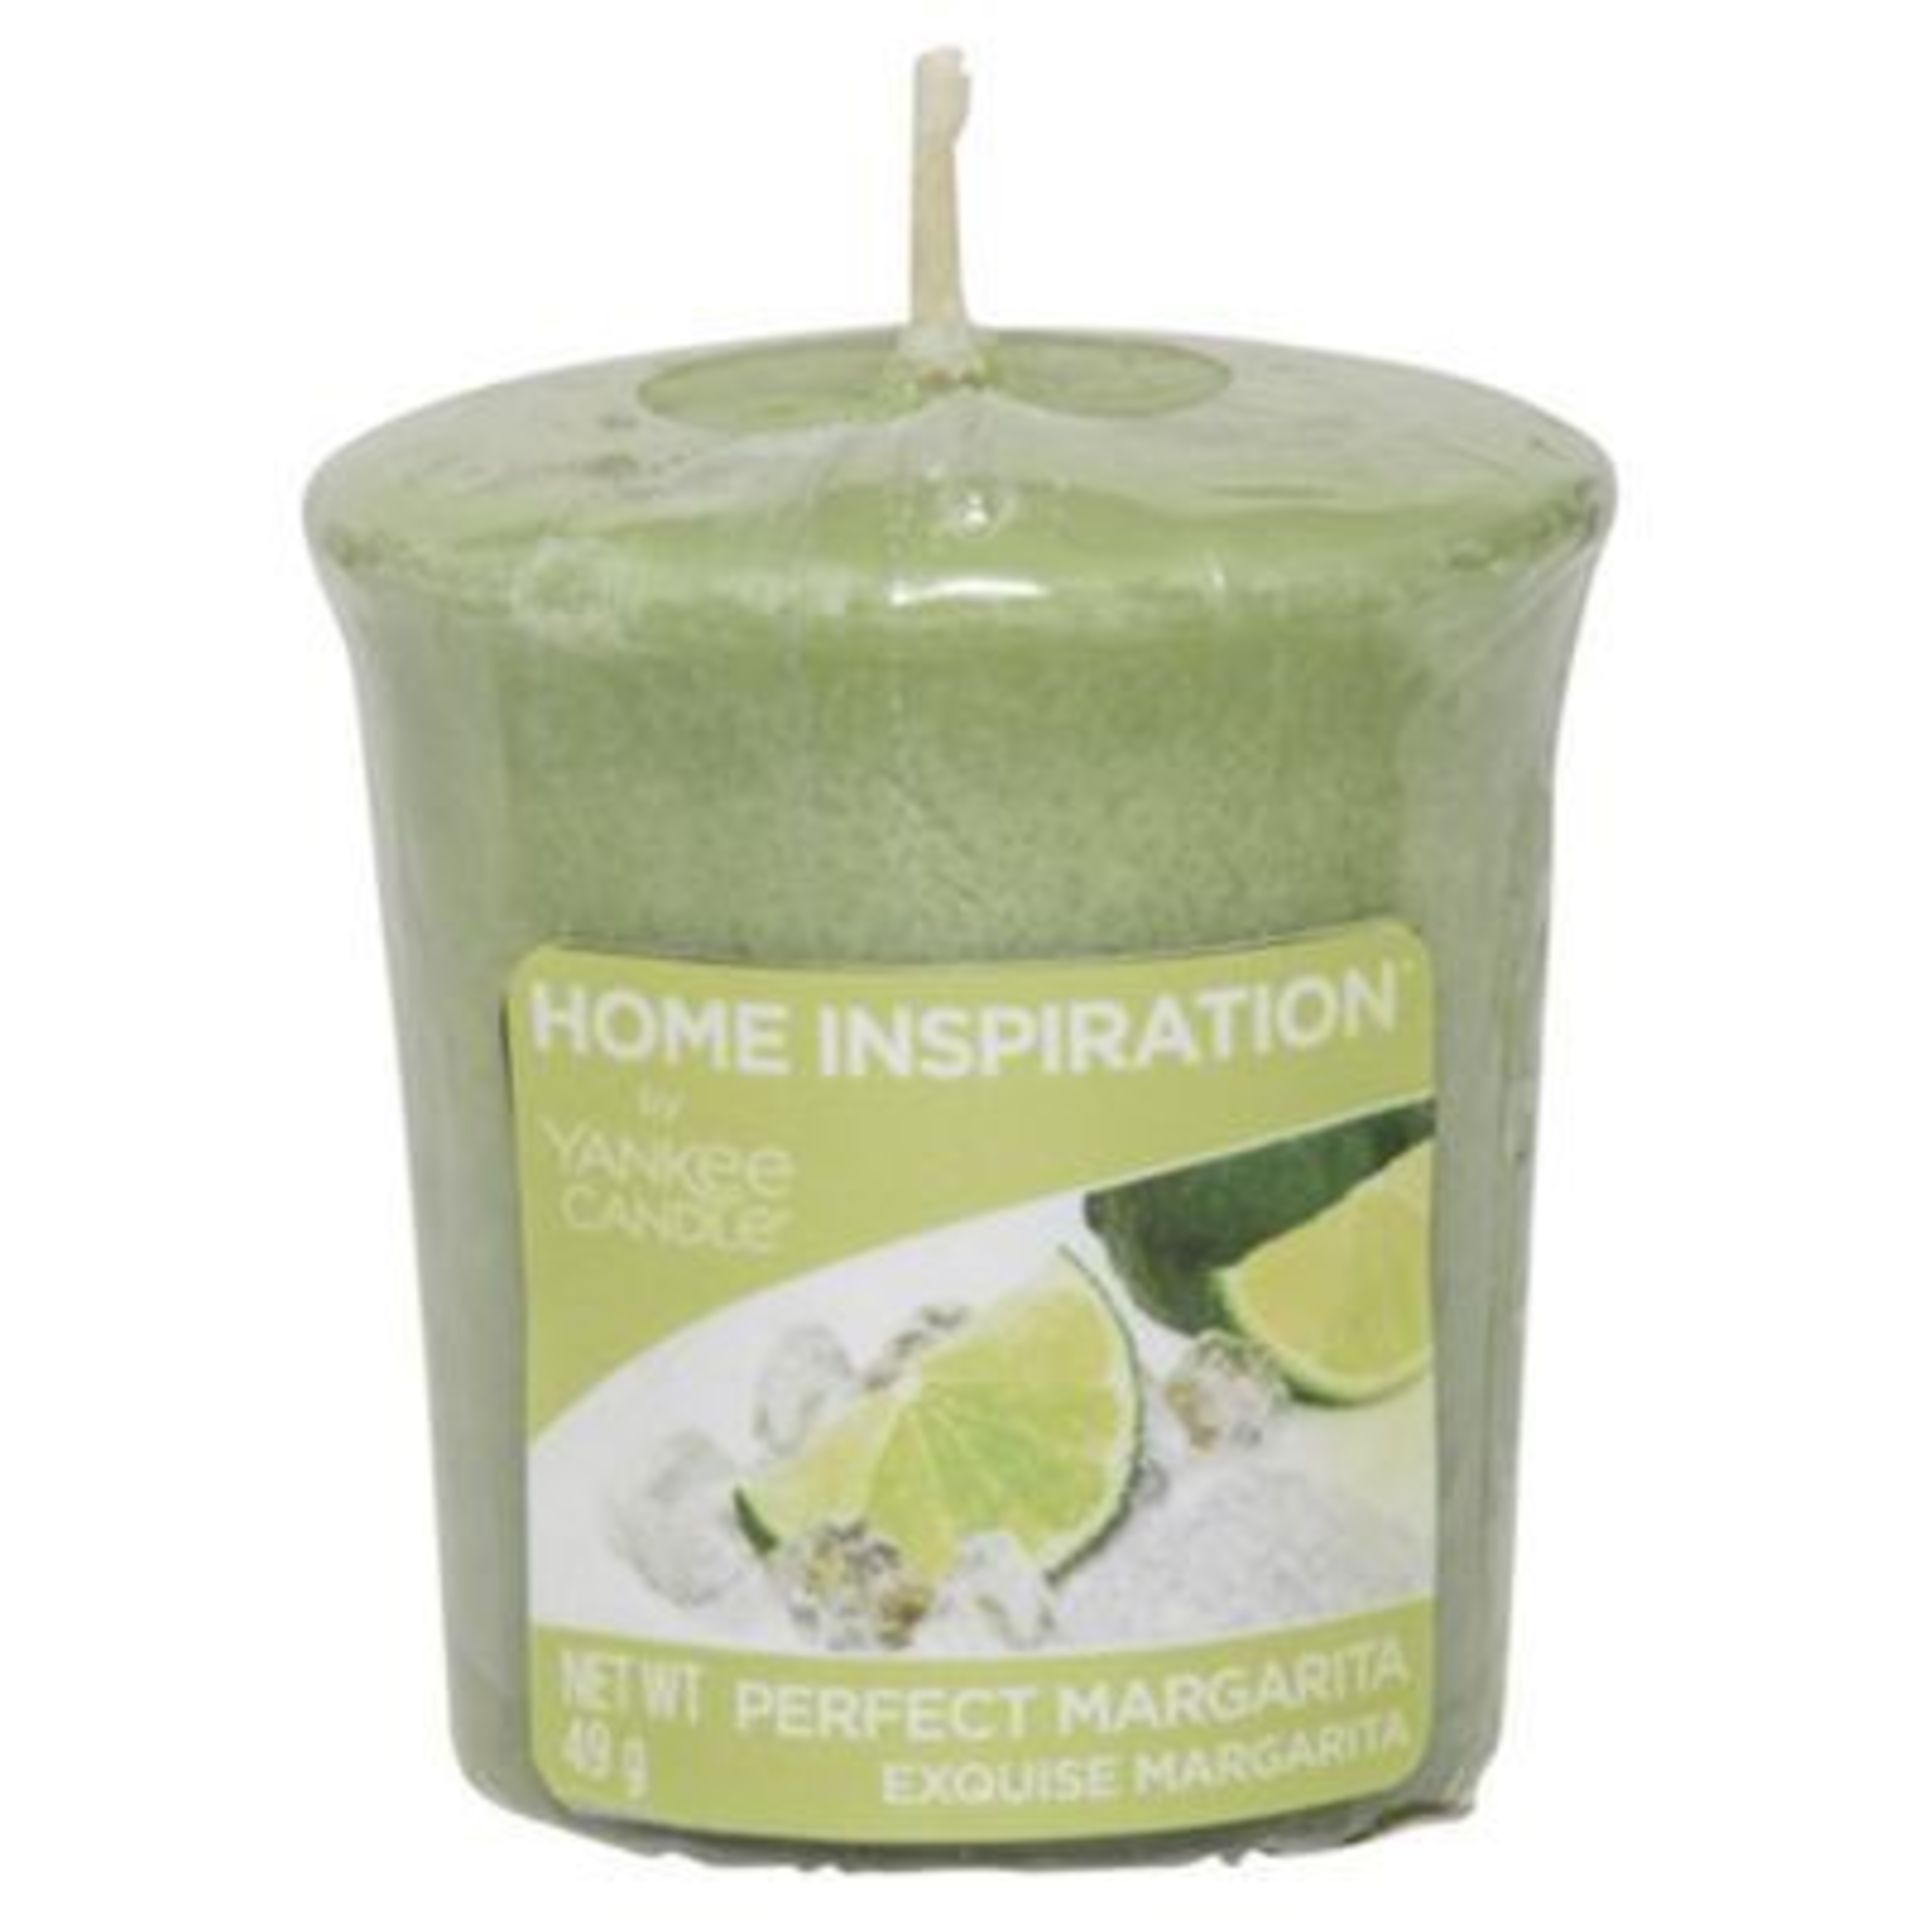 V *TRADE QTY* Brand New 18 X Yankee Candle Votive Perfect Margarita - eBay Price £107.82 X 4 YOUR - Image 2 of 2